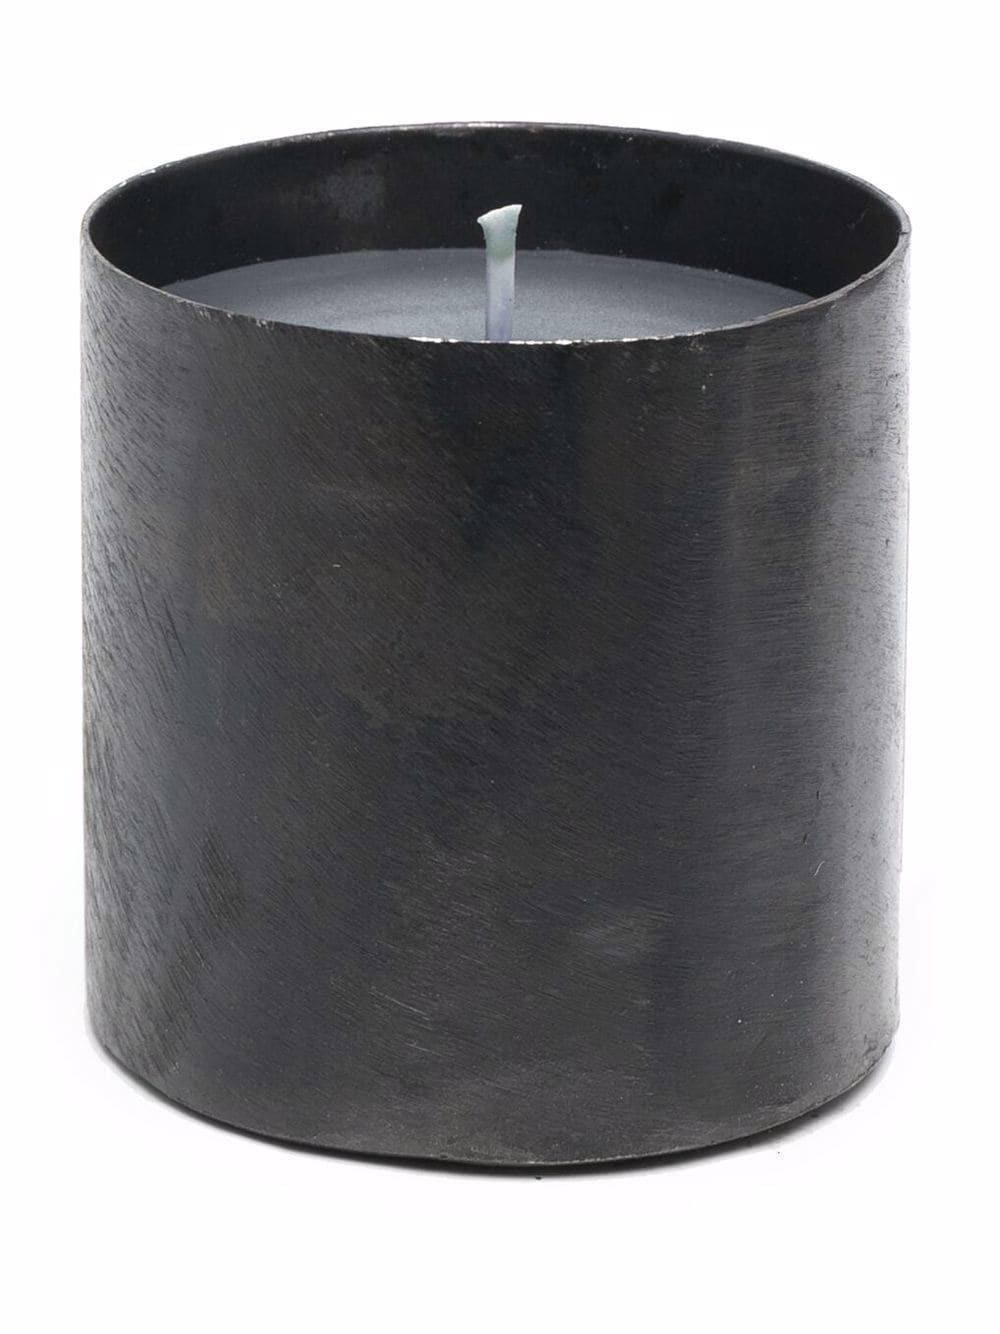 GRAND MOGUL SCENTED CANDLE (300G)